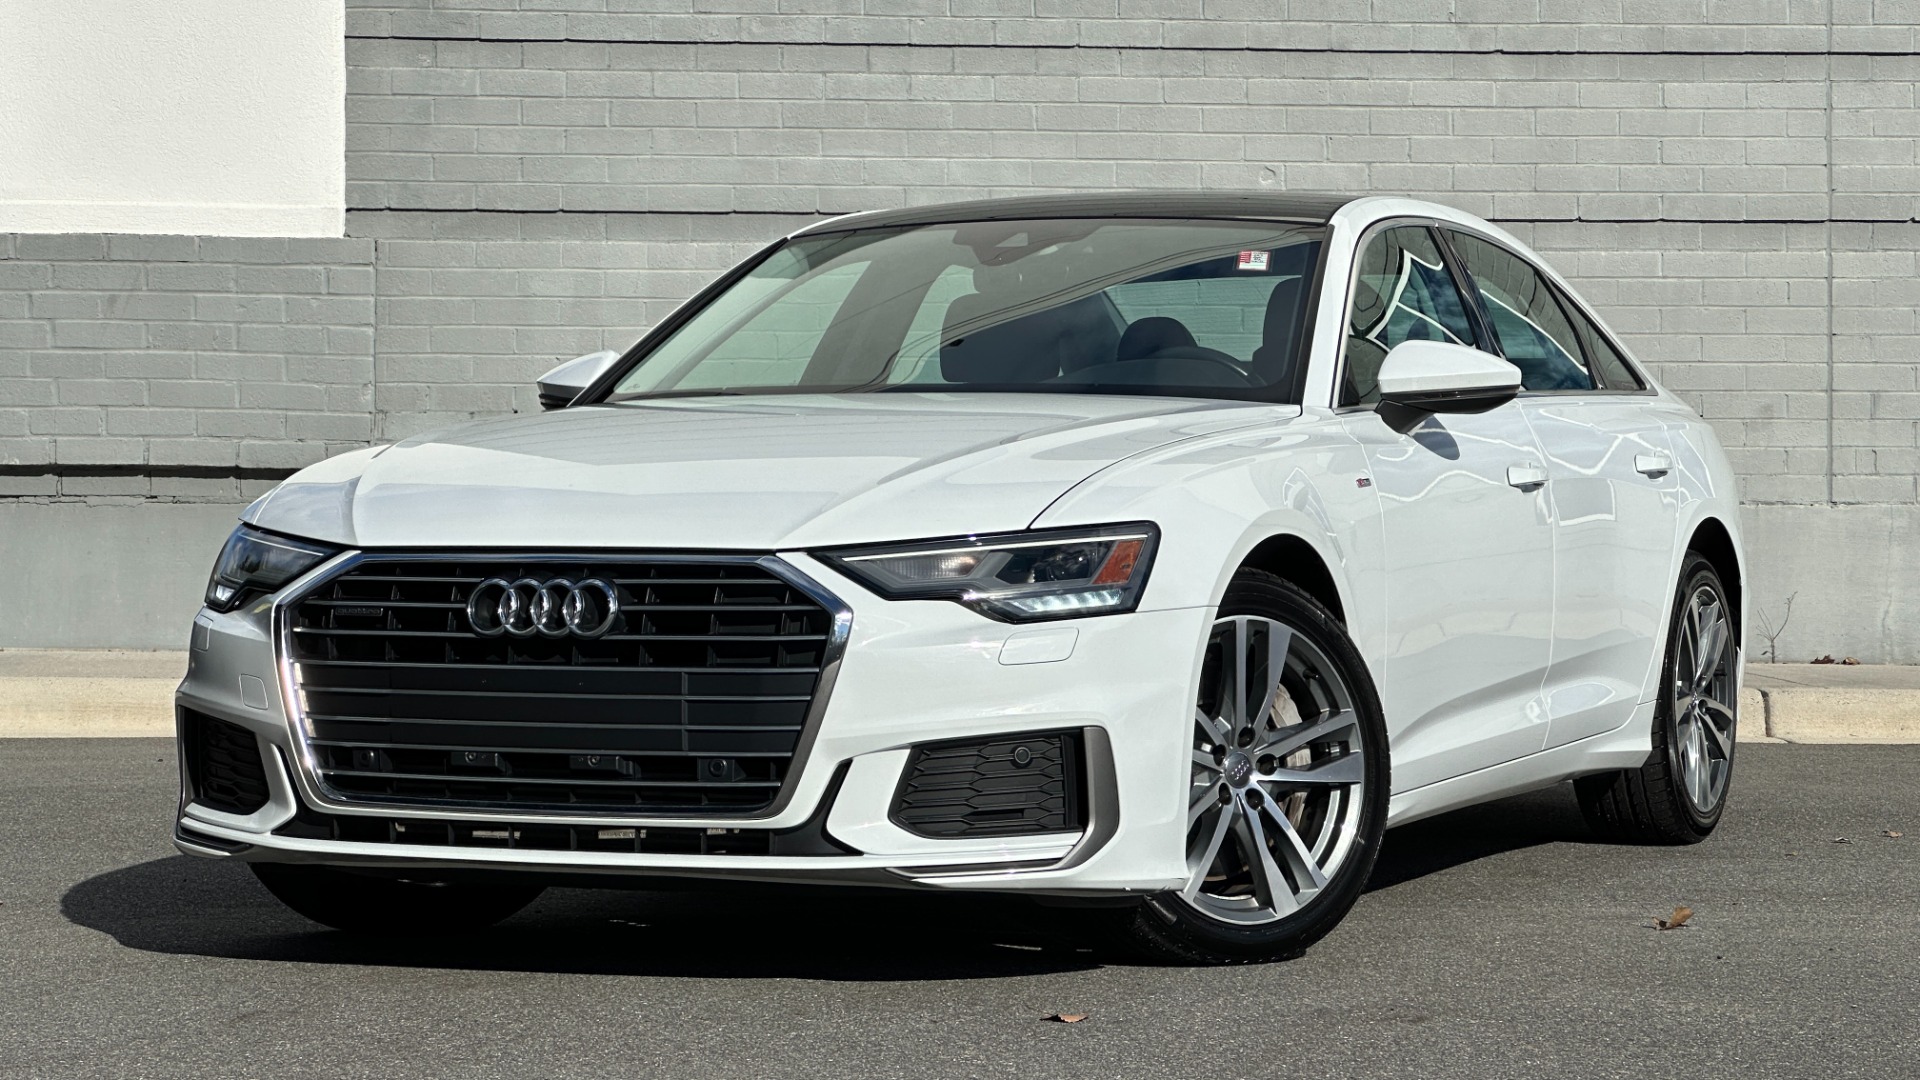 Used 2019 Audi A6 PREMIUM / COLD WEATHER PKG / CONVENIENCE PKG / INTERIOR PROTECTION PKG for sale $36,995 at Formula Imports in Charlotte NC 28227 1